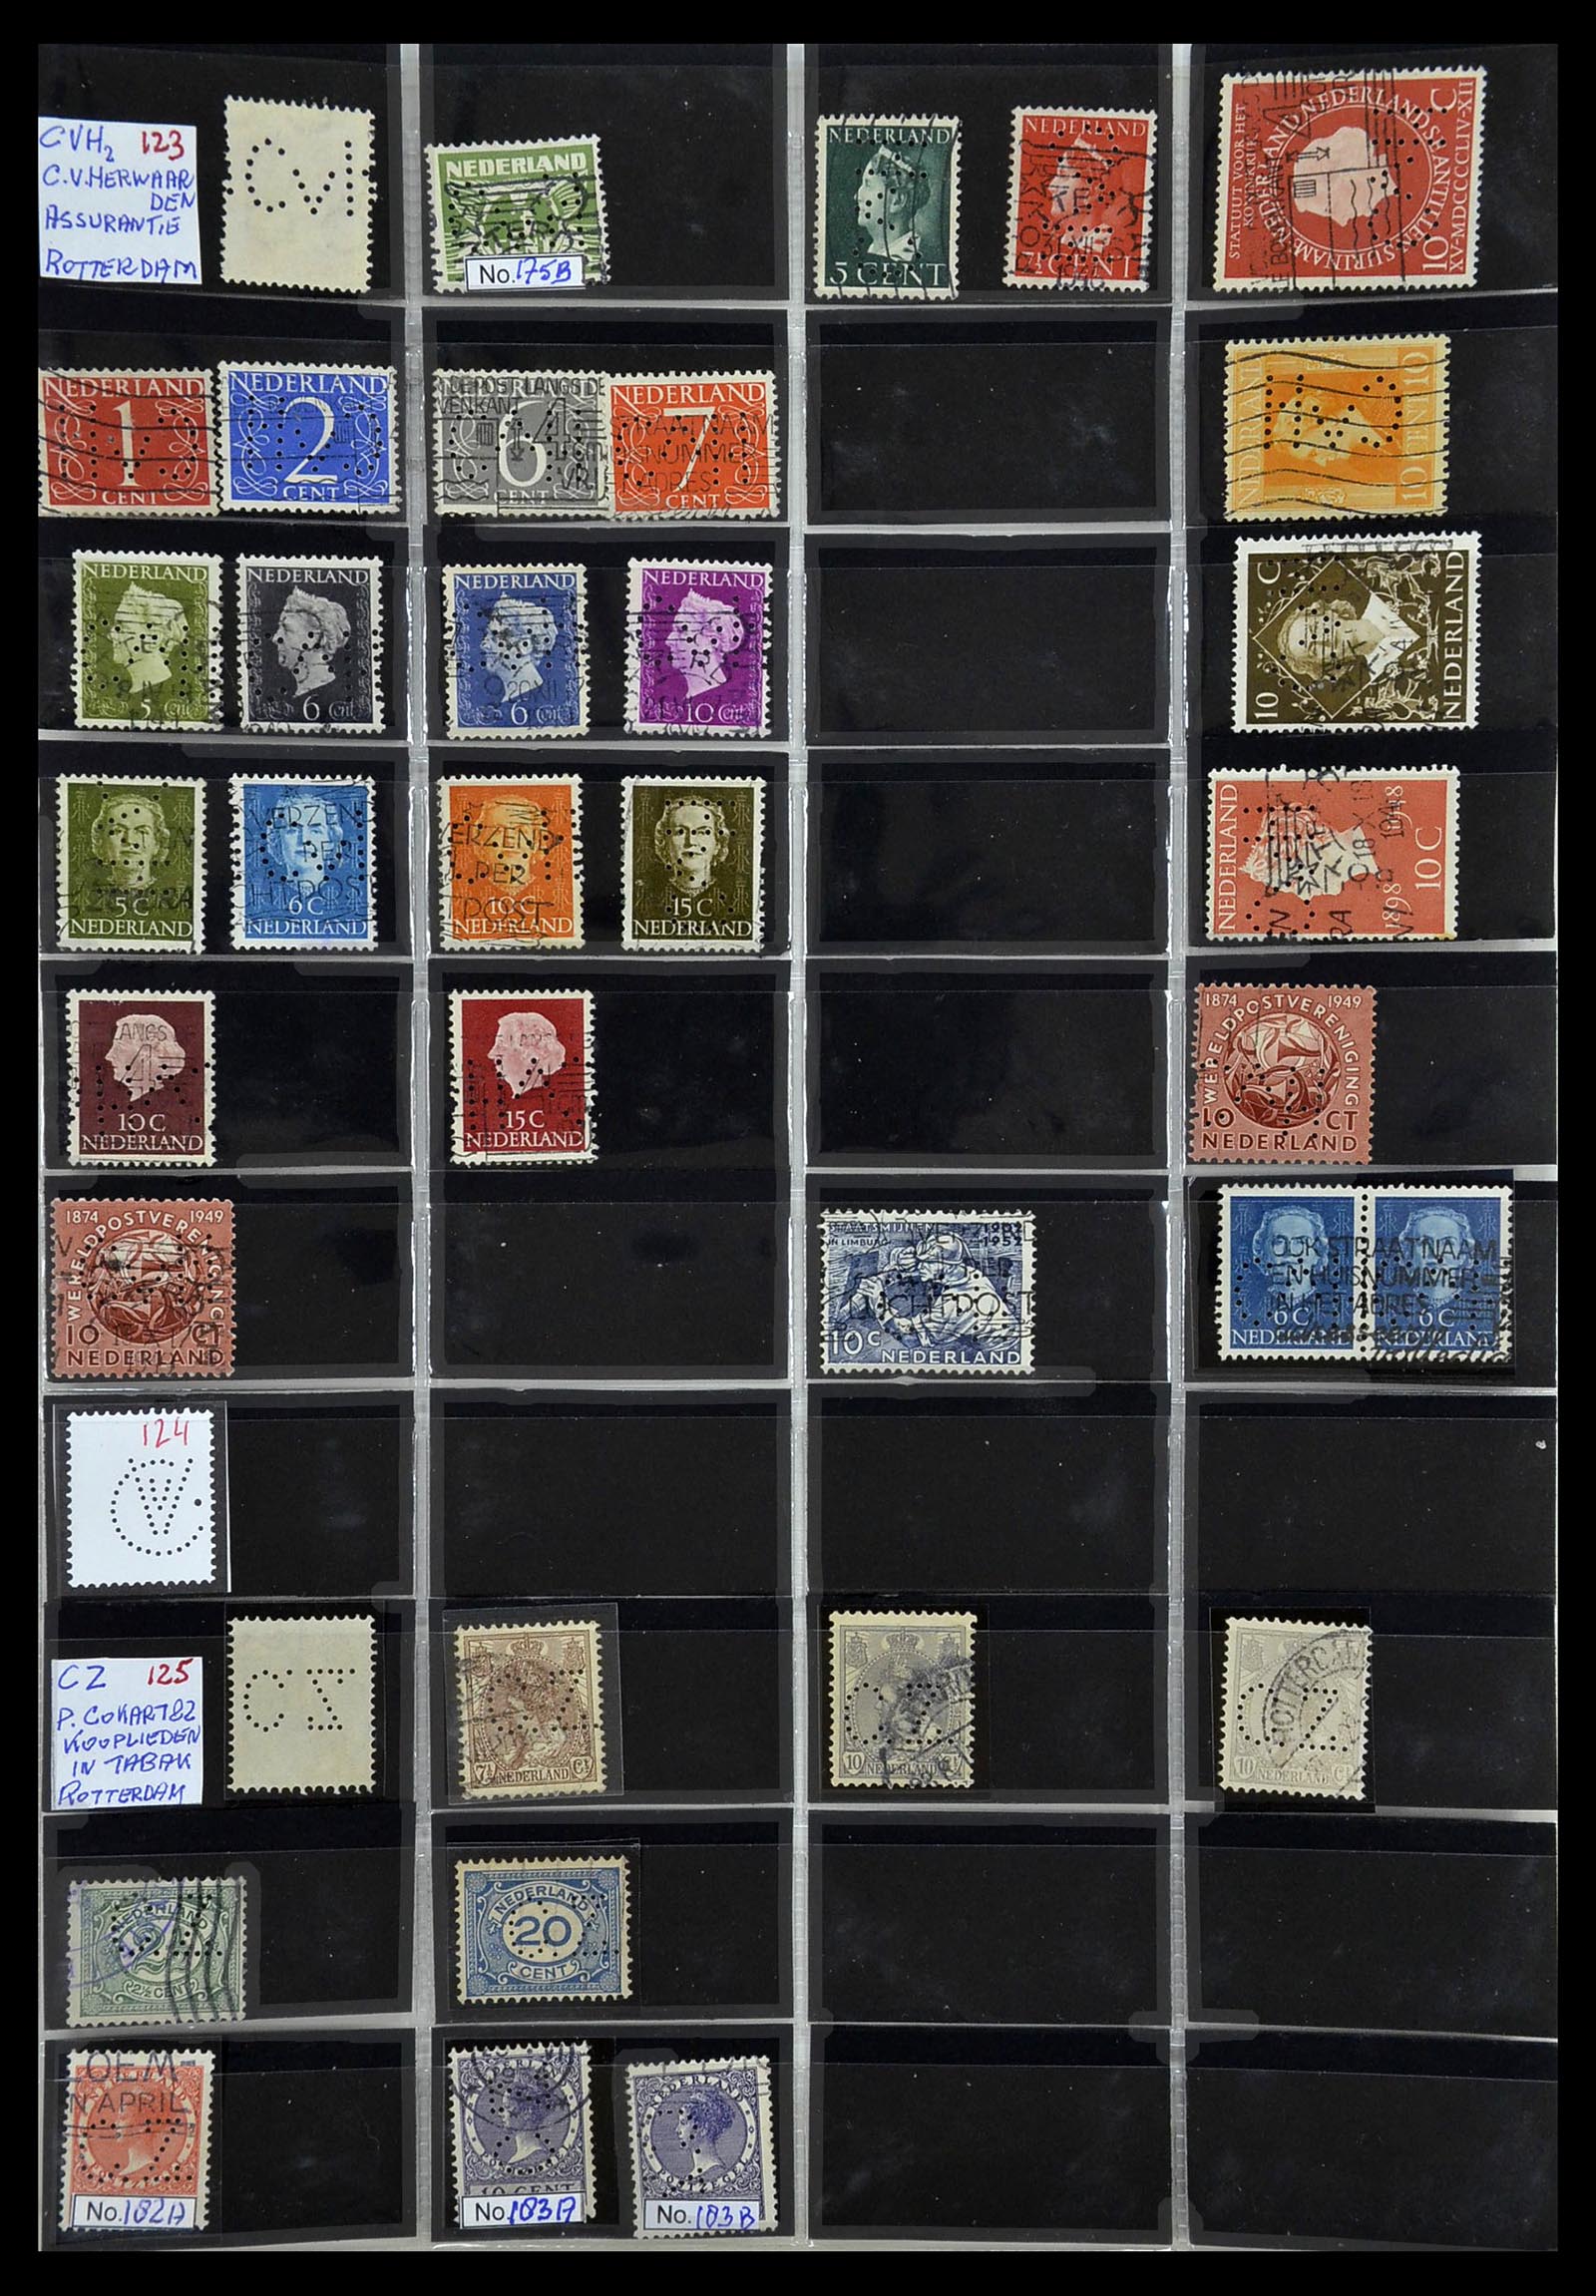 34390 059 - Stamp Collection 34390 Netherlands perfins 1872-1965.